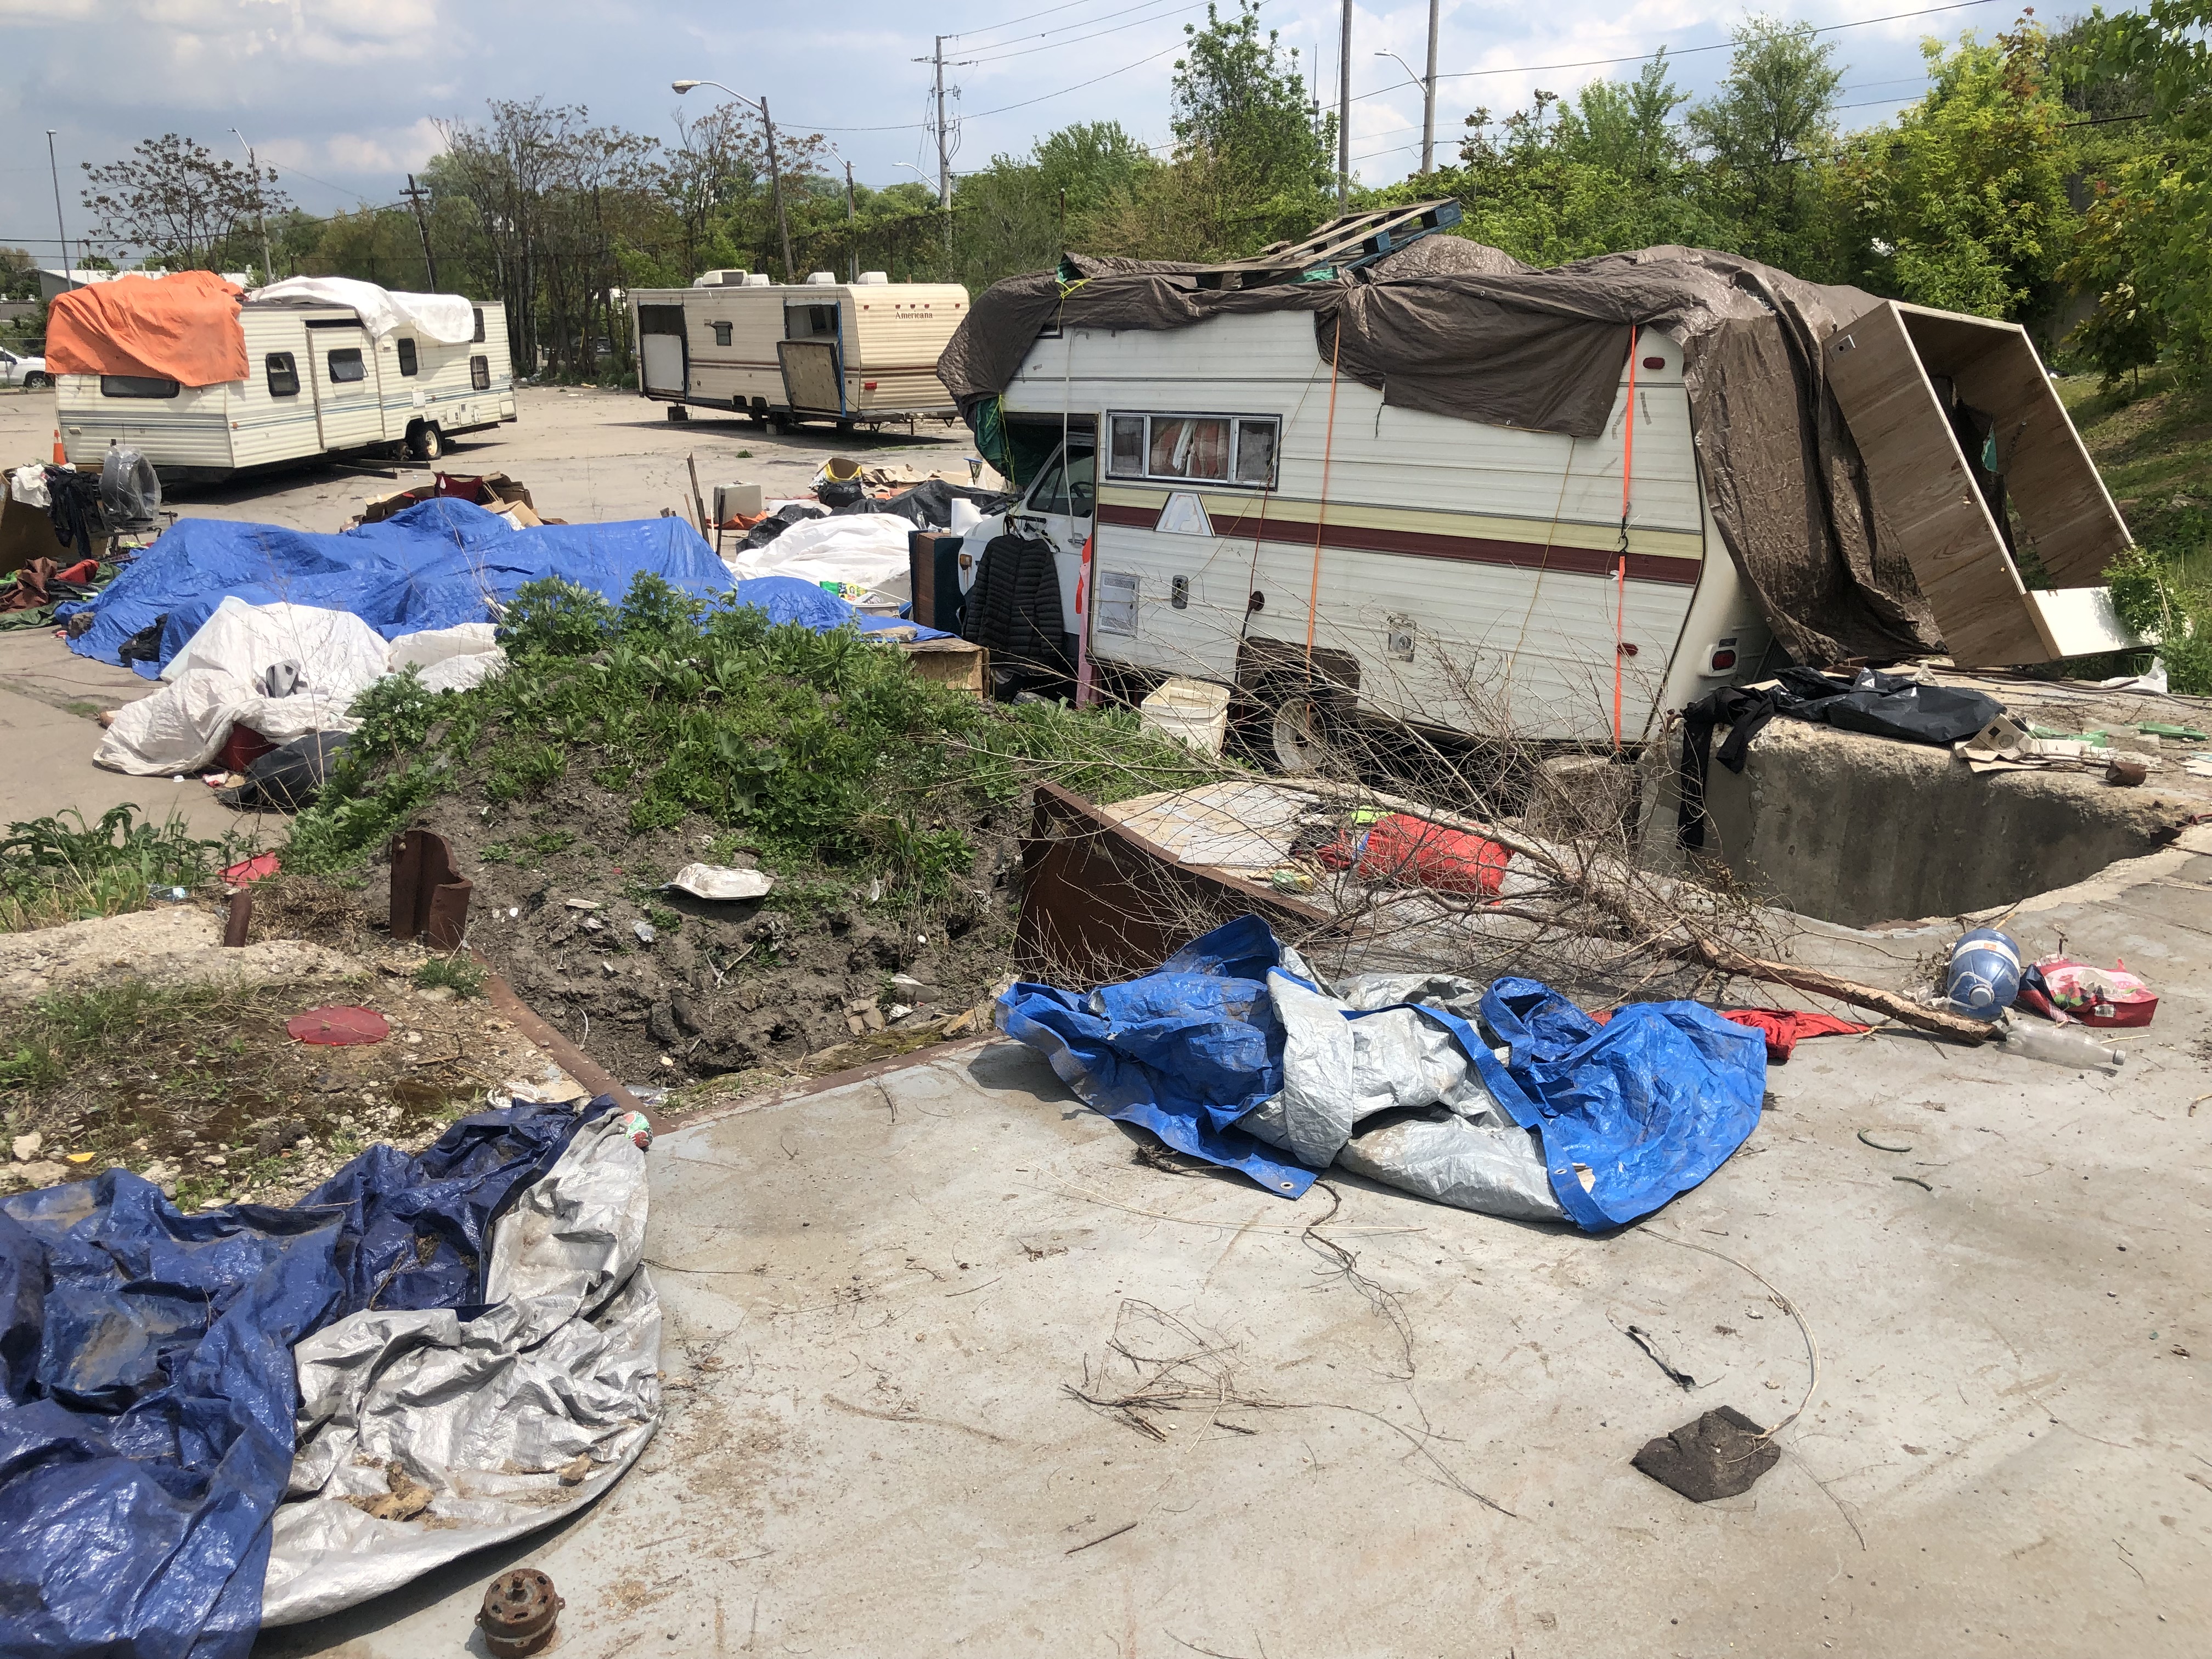 Ontario woman living illegally in RV encampment as rents continue to rise